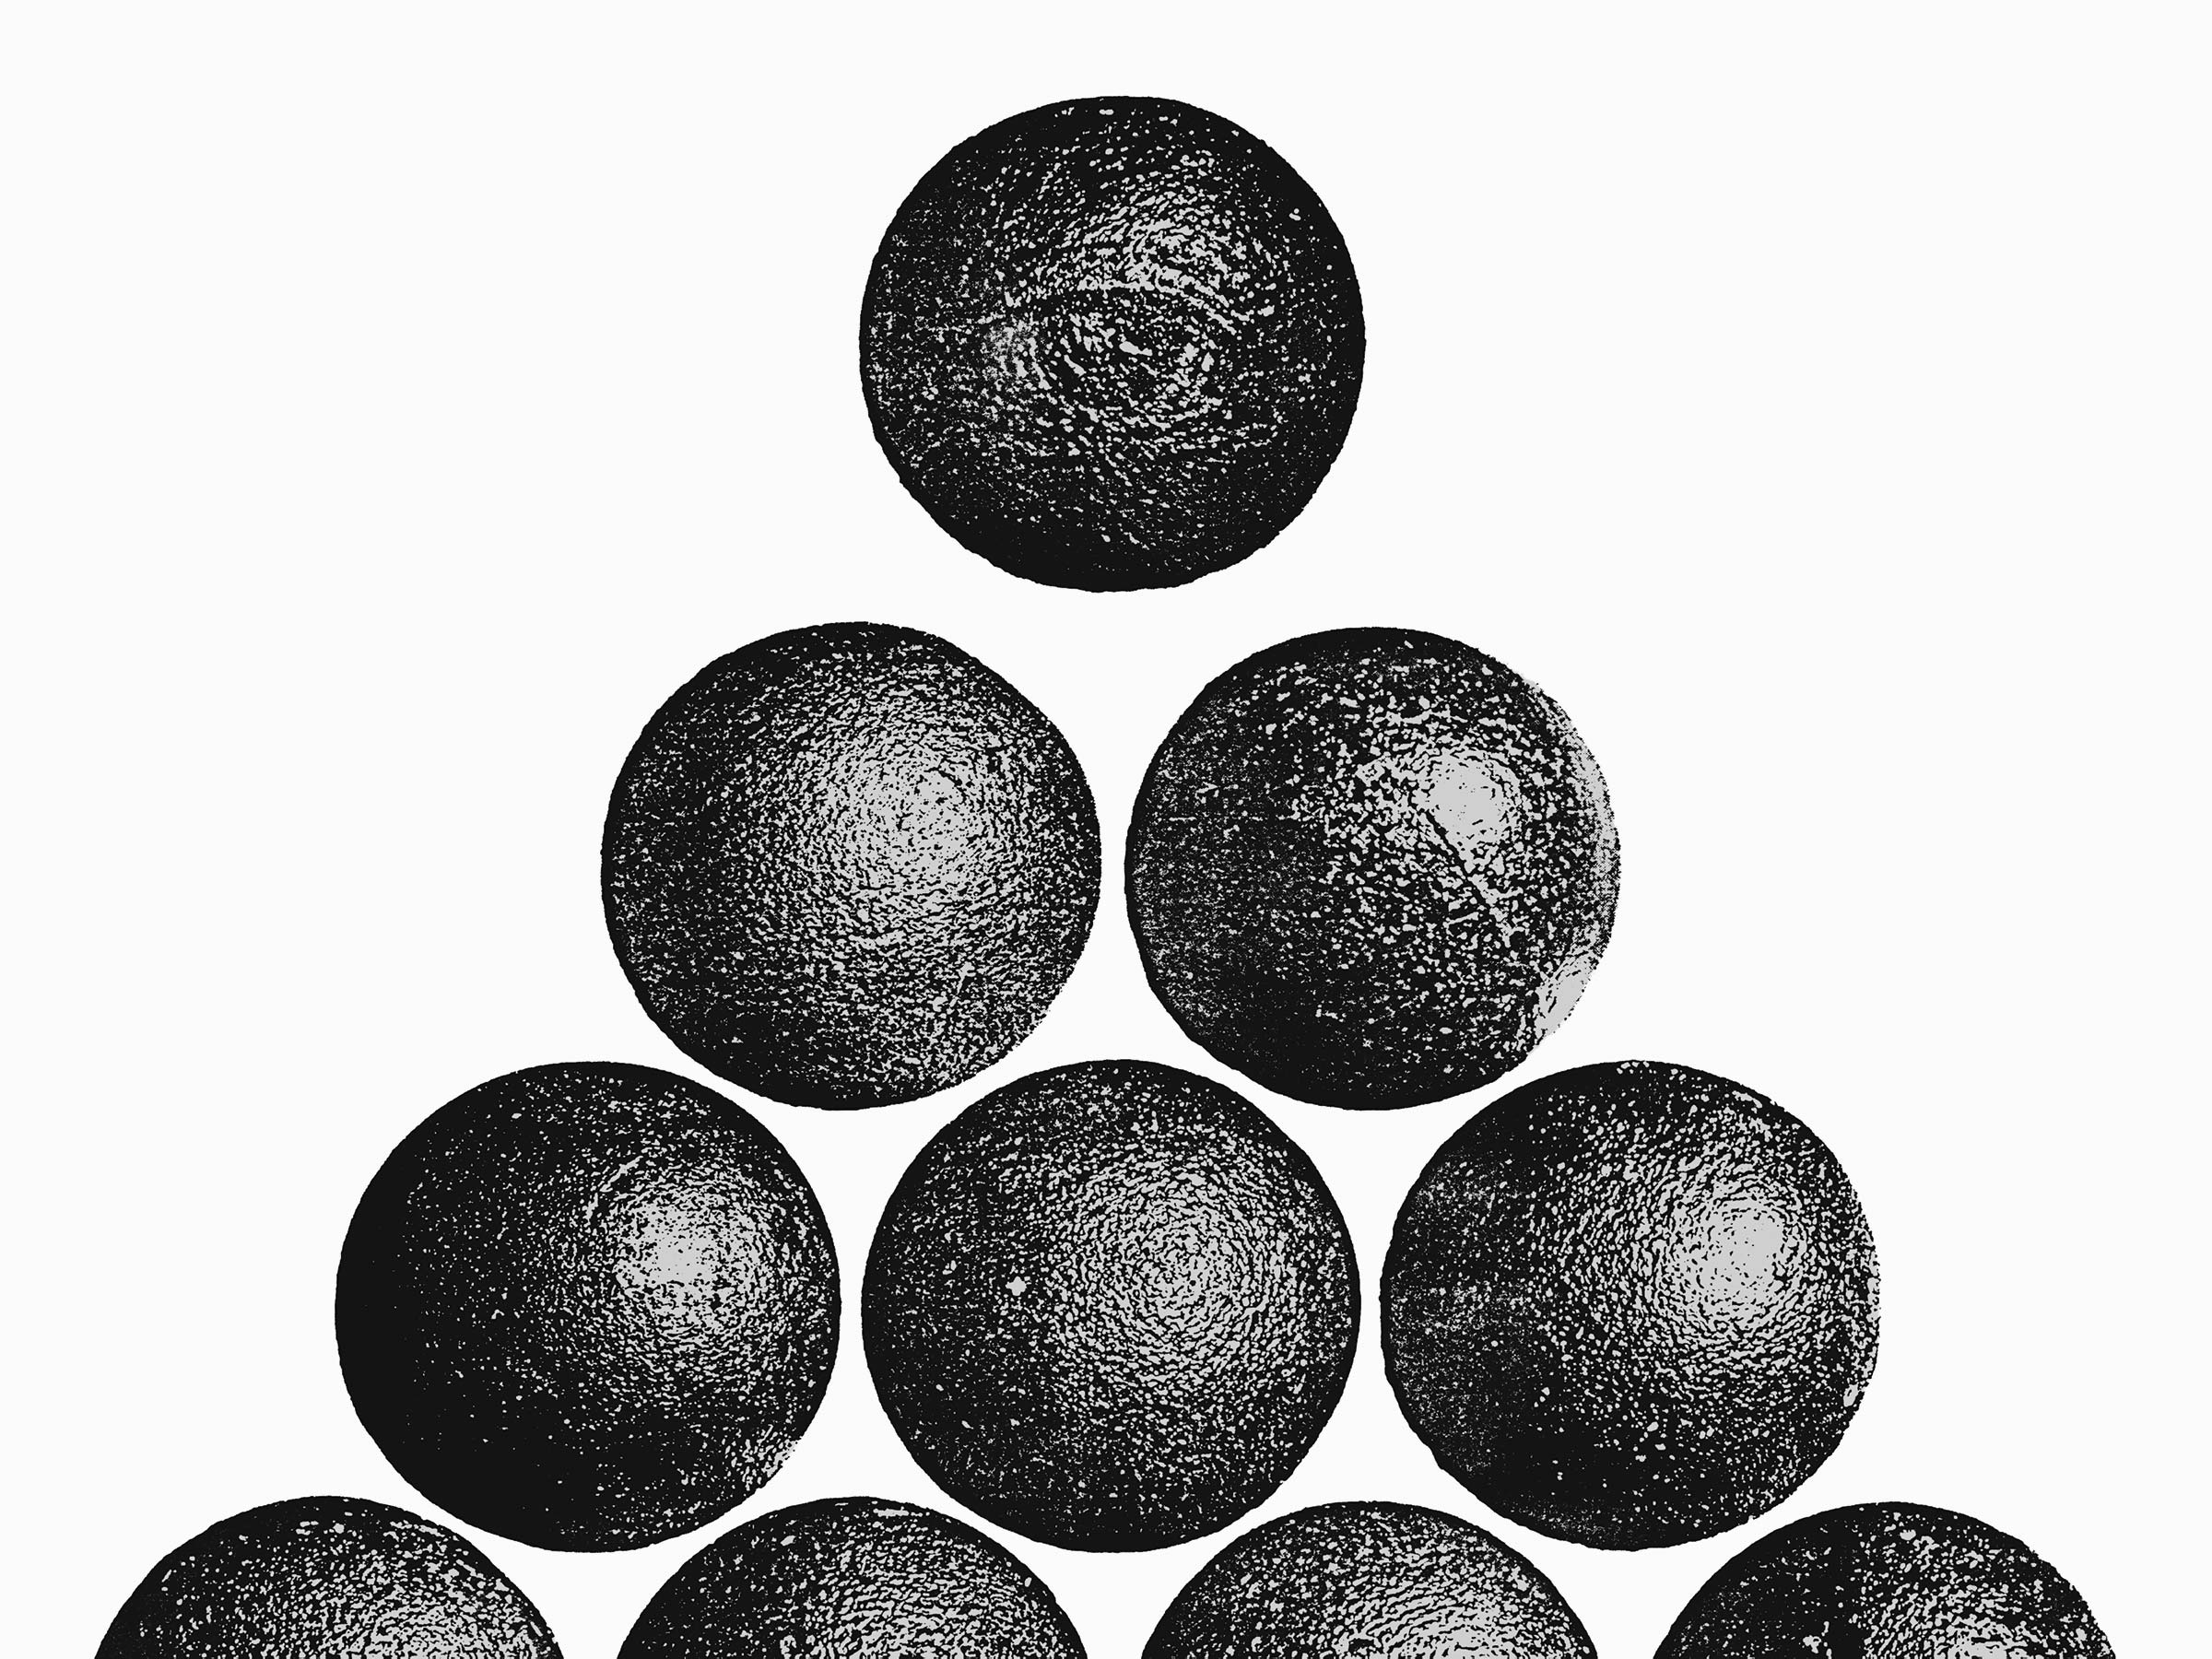 Twilights Last Gleaming. A two-color screenprint of a stack of cannonballs, with the Eye of Providence hidden in the top cannonball.